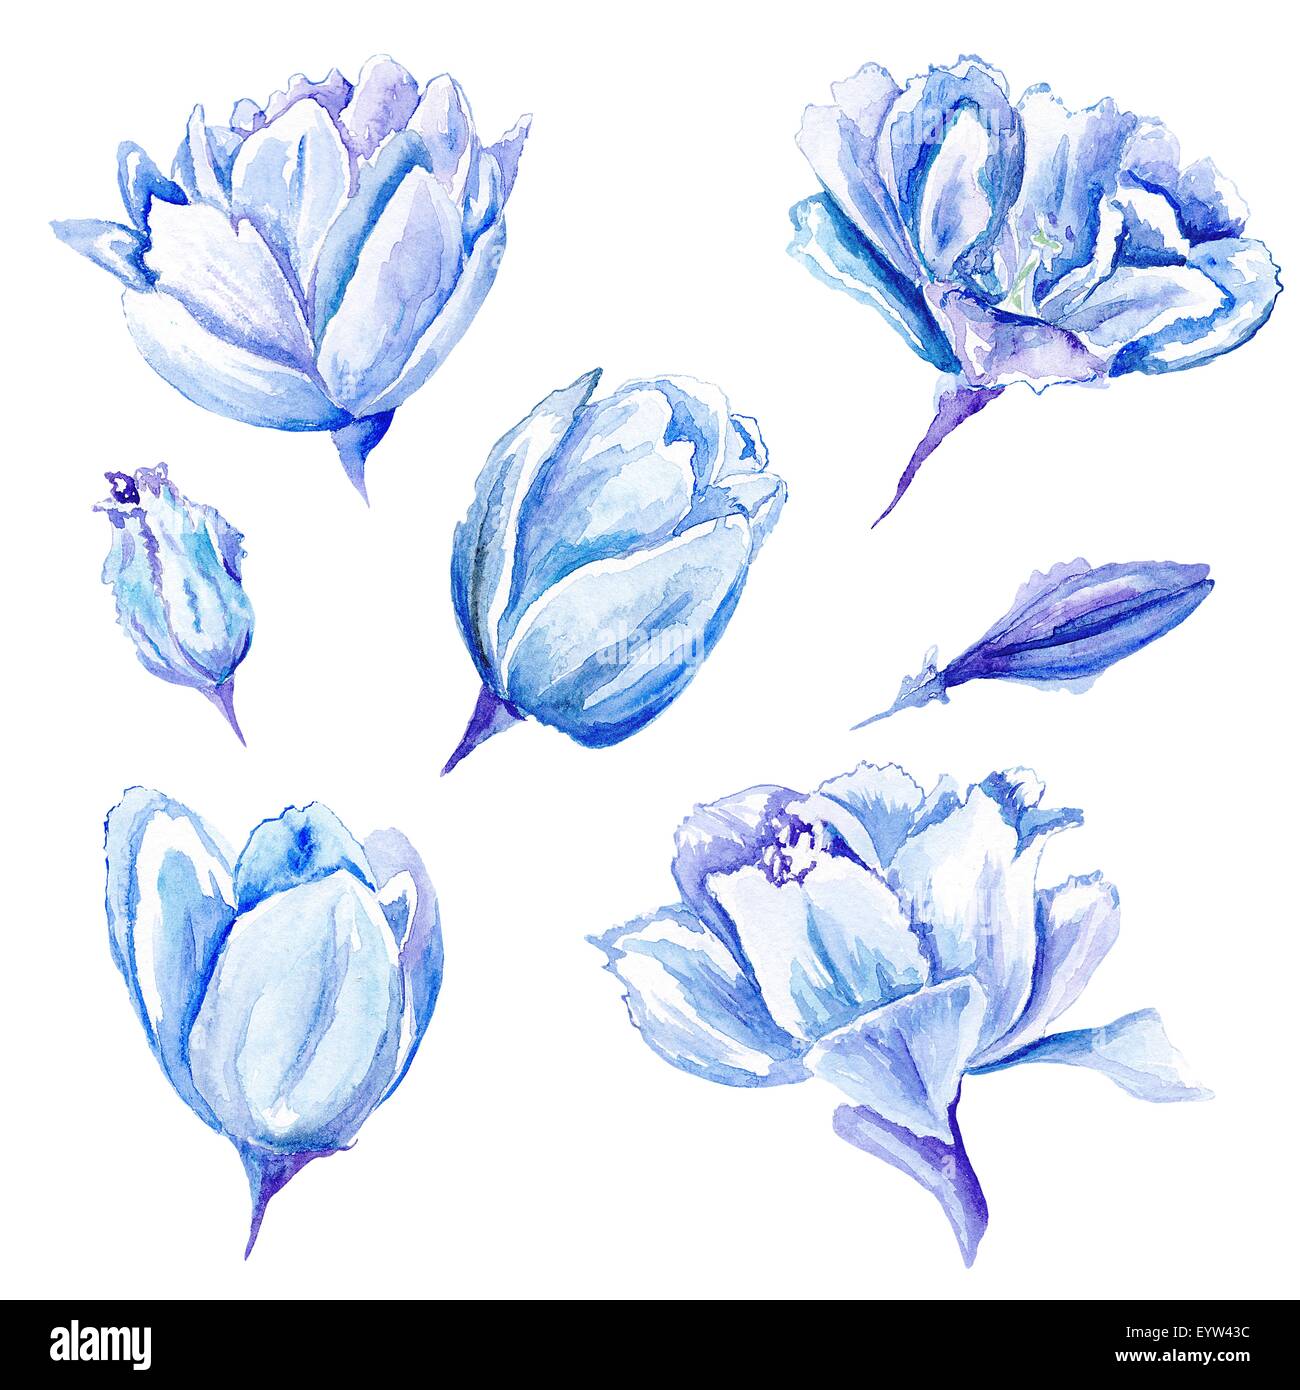 Tender soft indigo colored flowers isolated on white background for card, event design Stock Photo